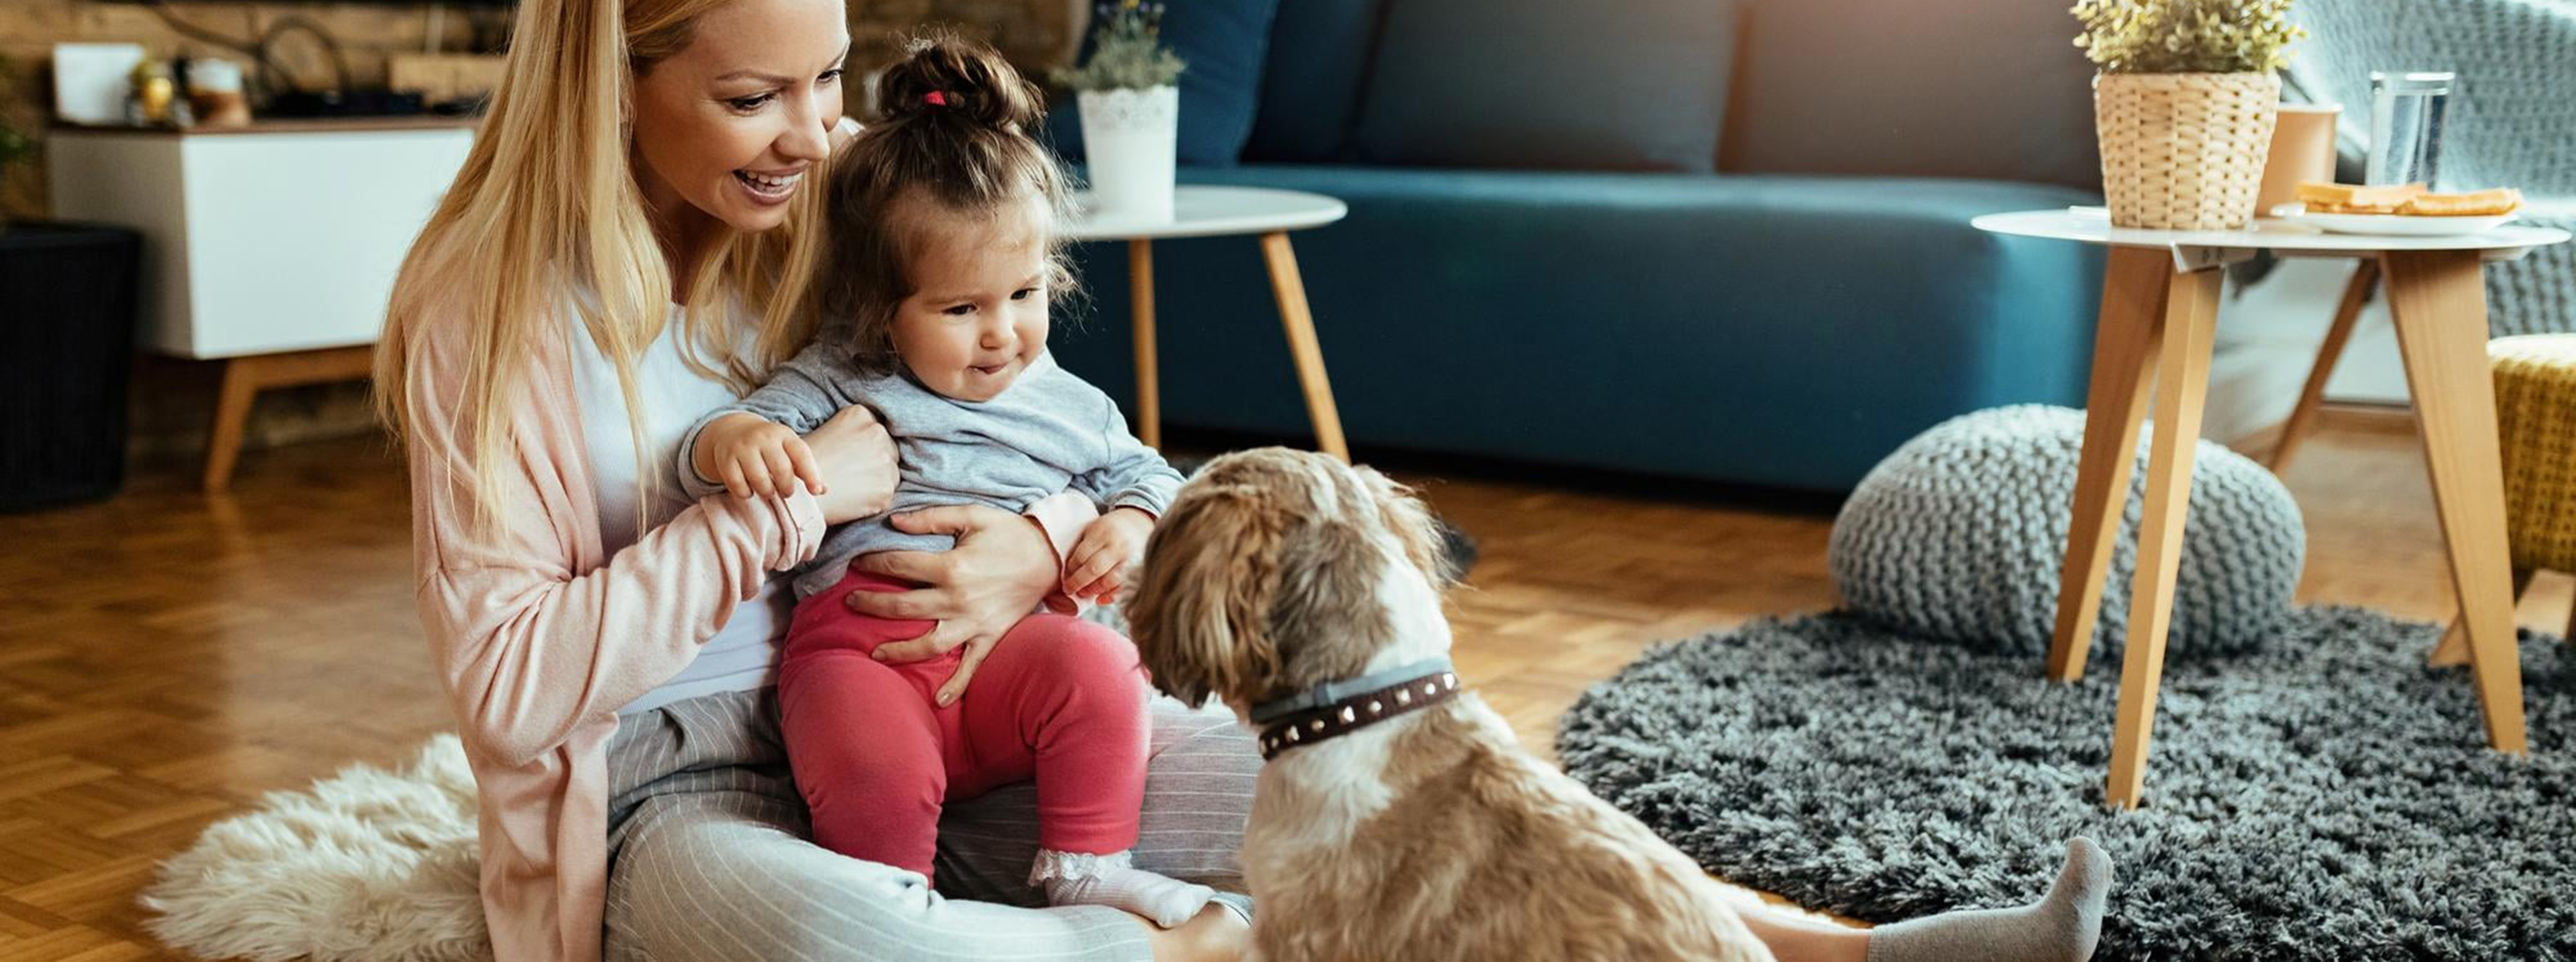 Why is it important to teach children to treat animals humanely?